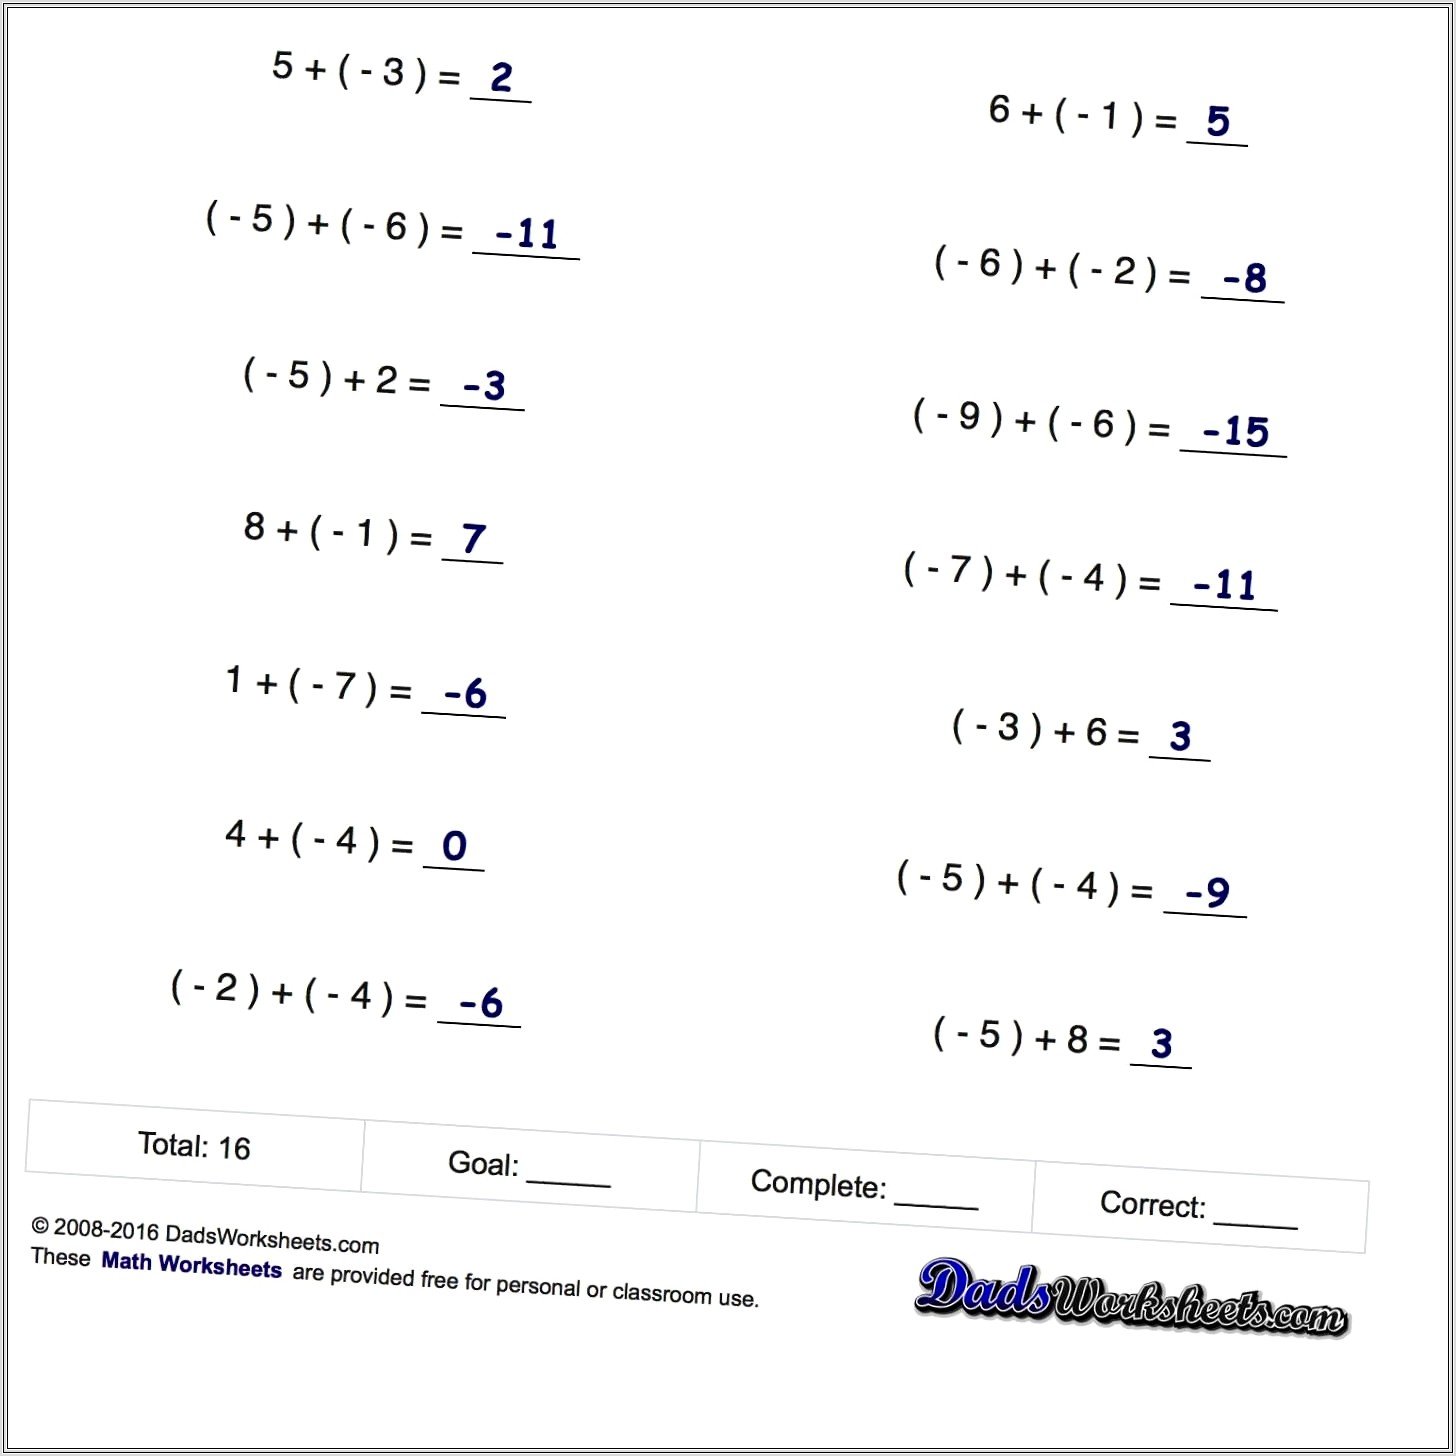 number-line-with-negative-numbers-template-worksheet-restiumani-resume-45ykewzdlw